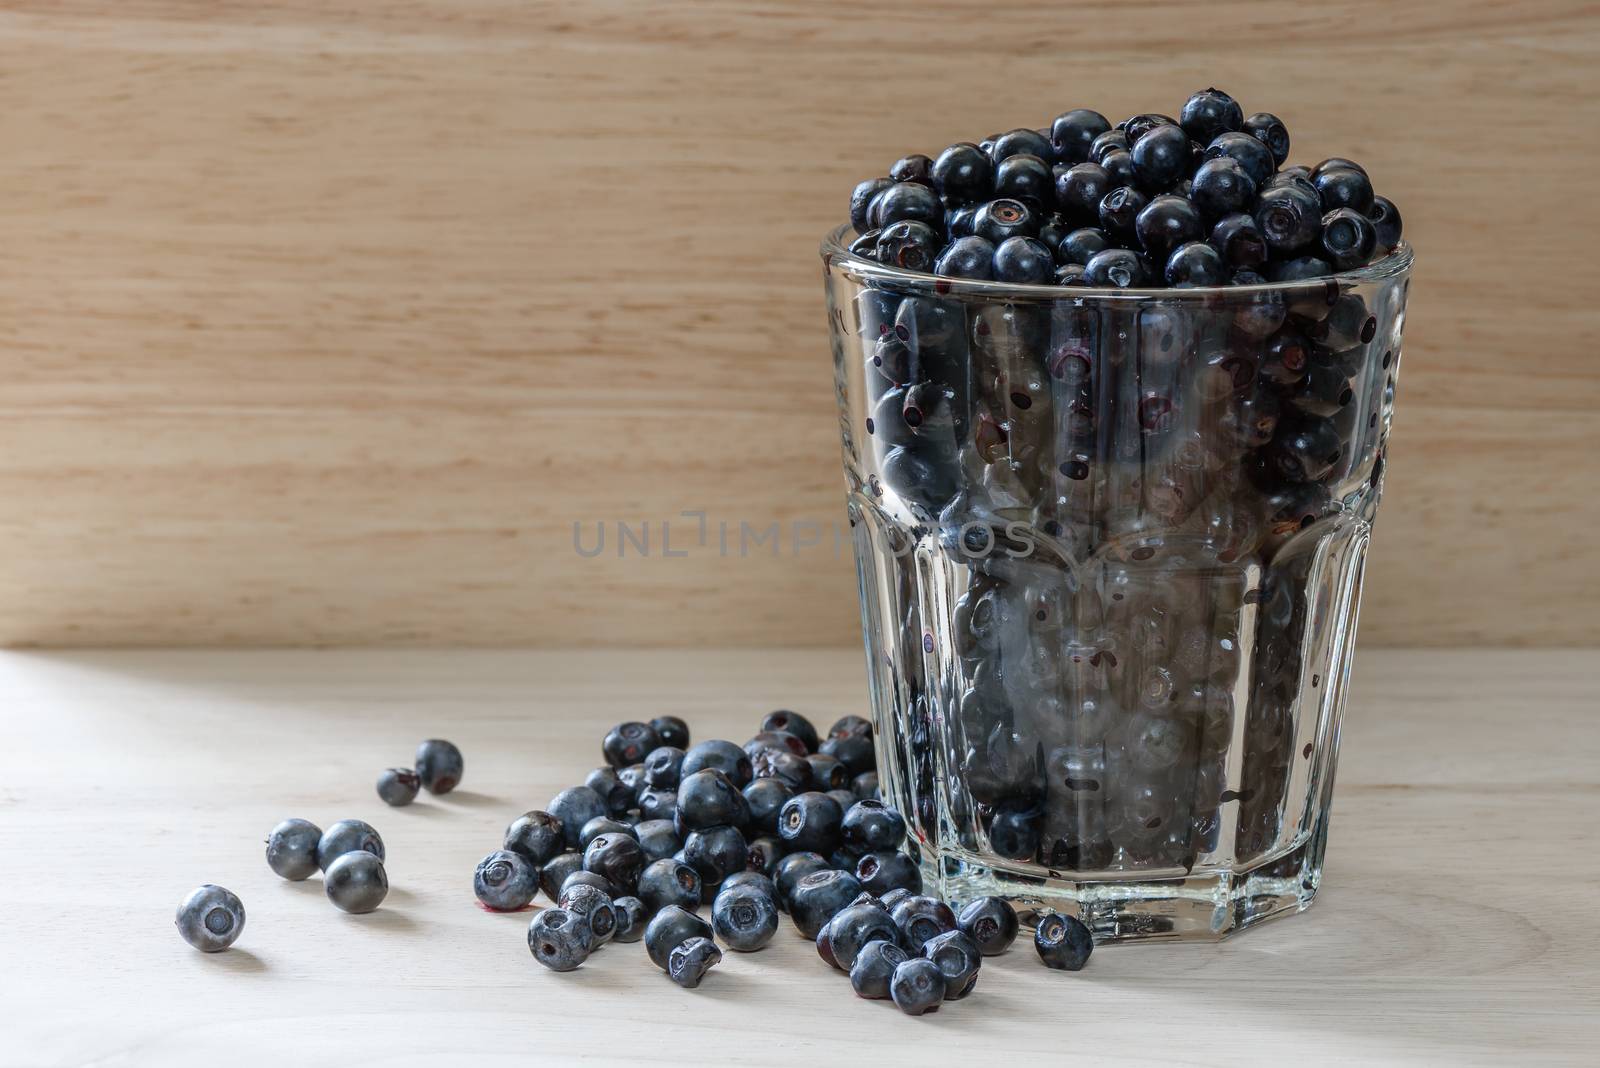 Blueberries in a glass with scattered berries. Good addition for breakfast